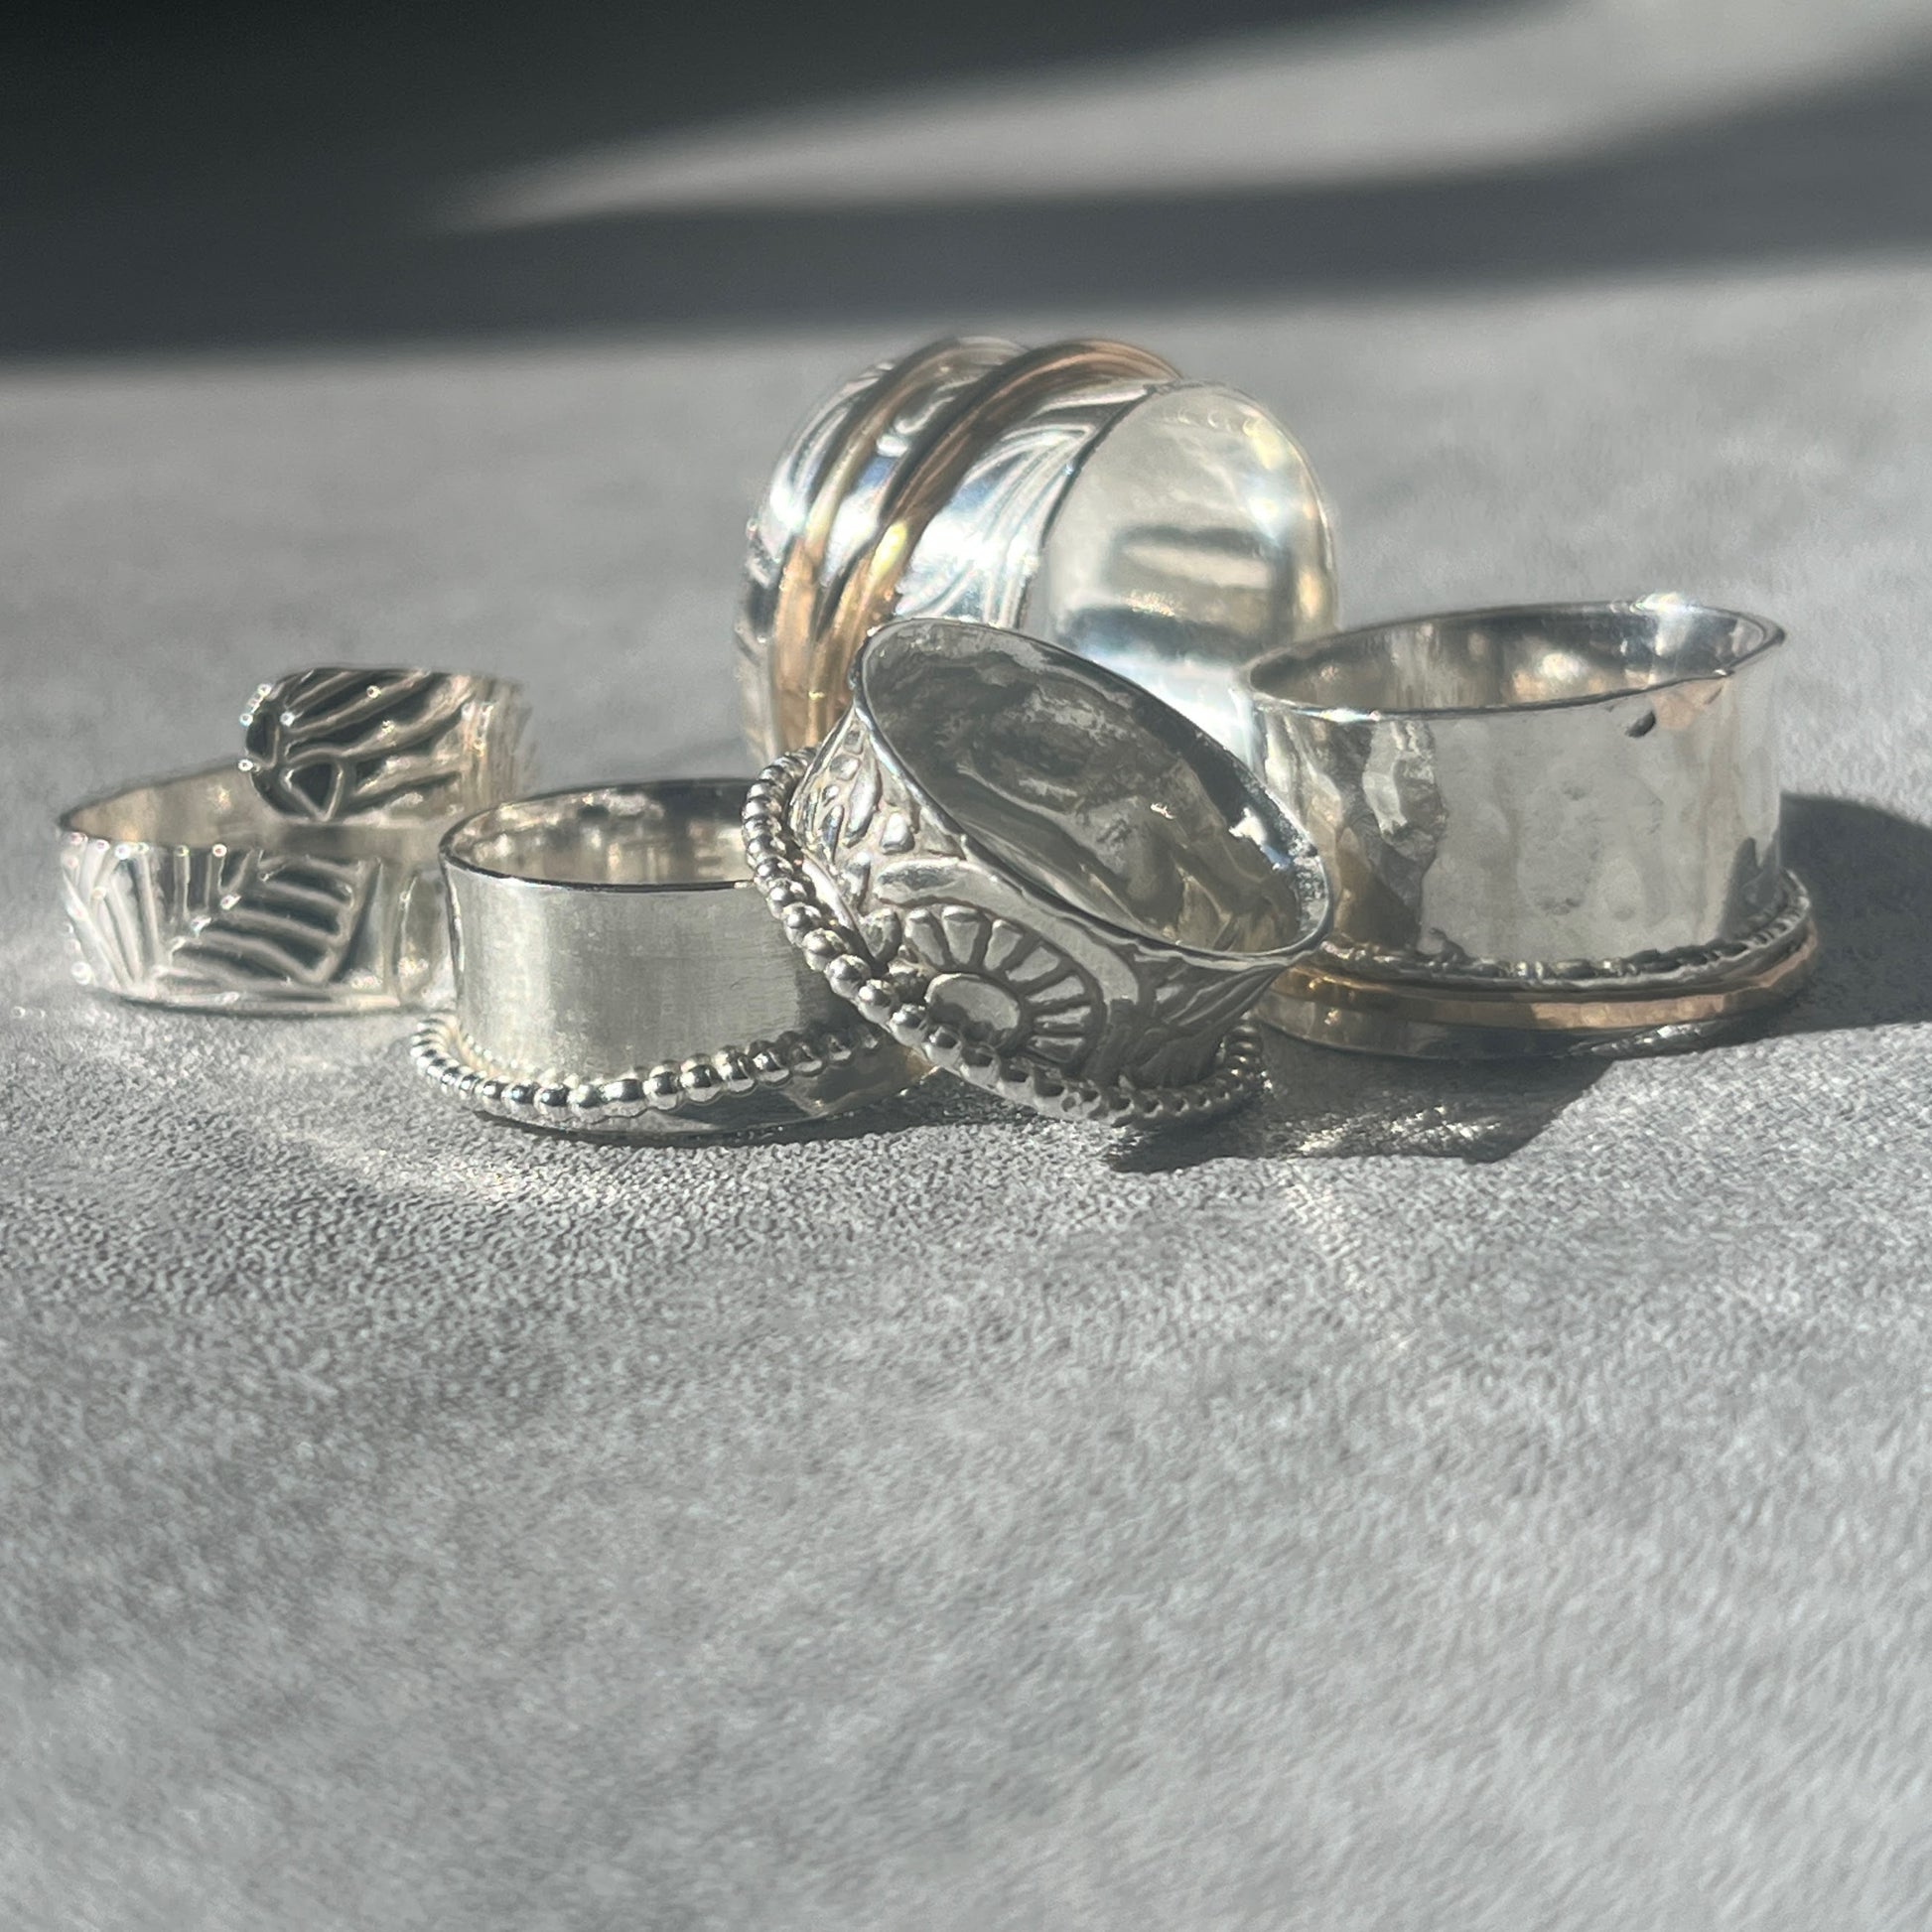 a collection of the various spinner rings available five in the picture in bright light